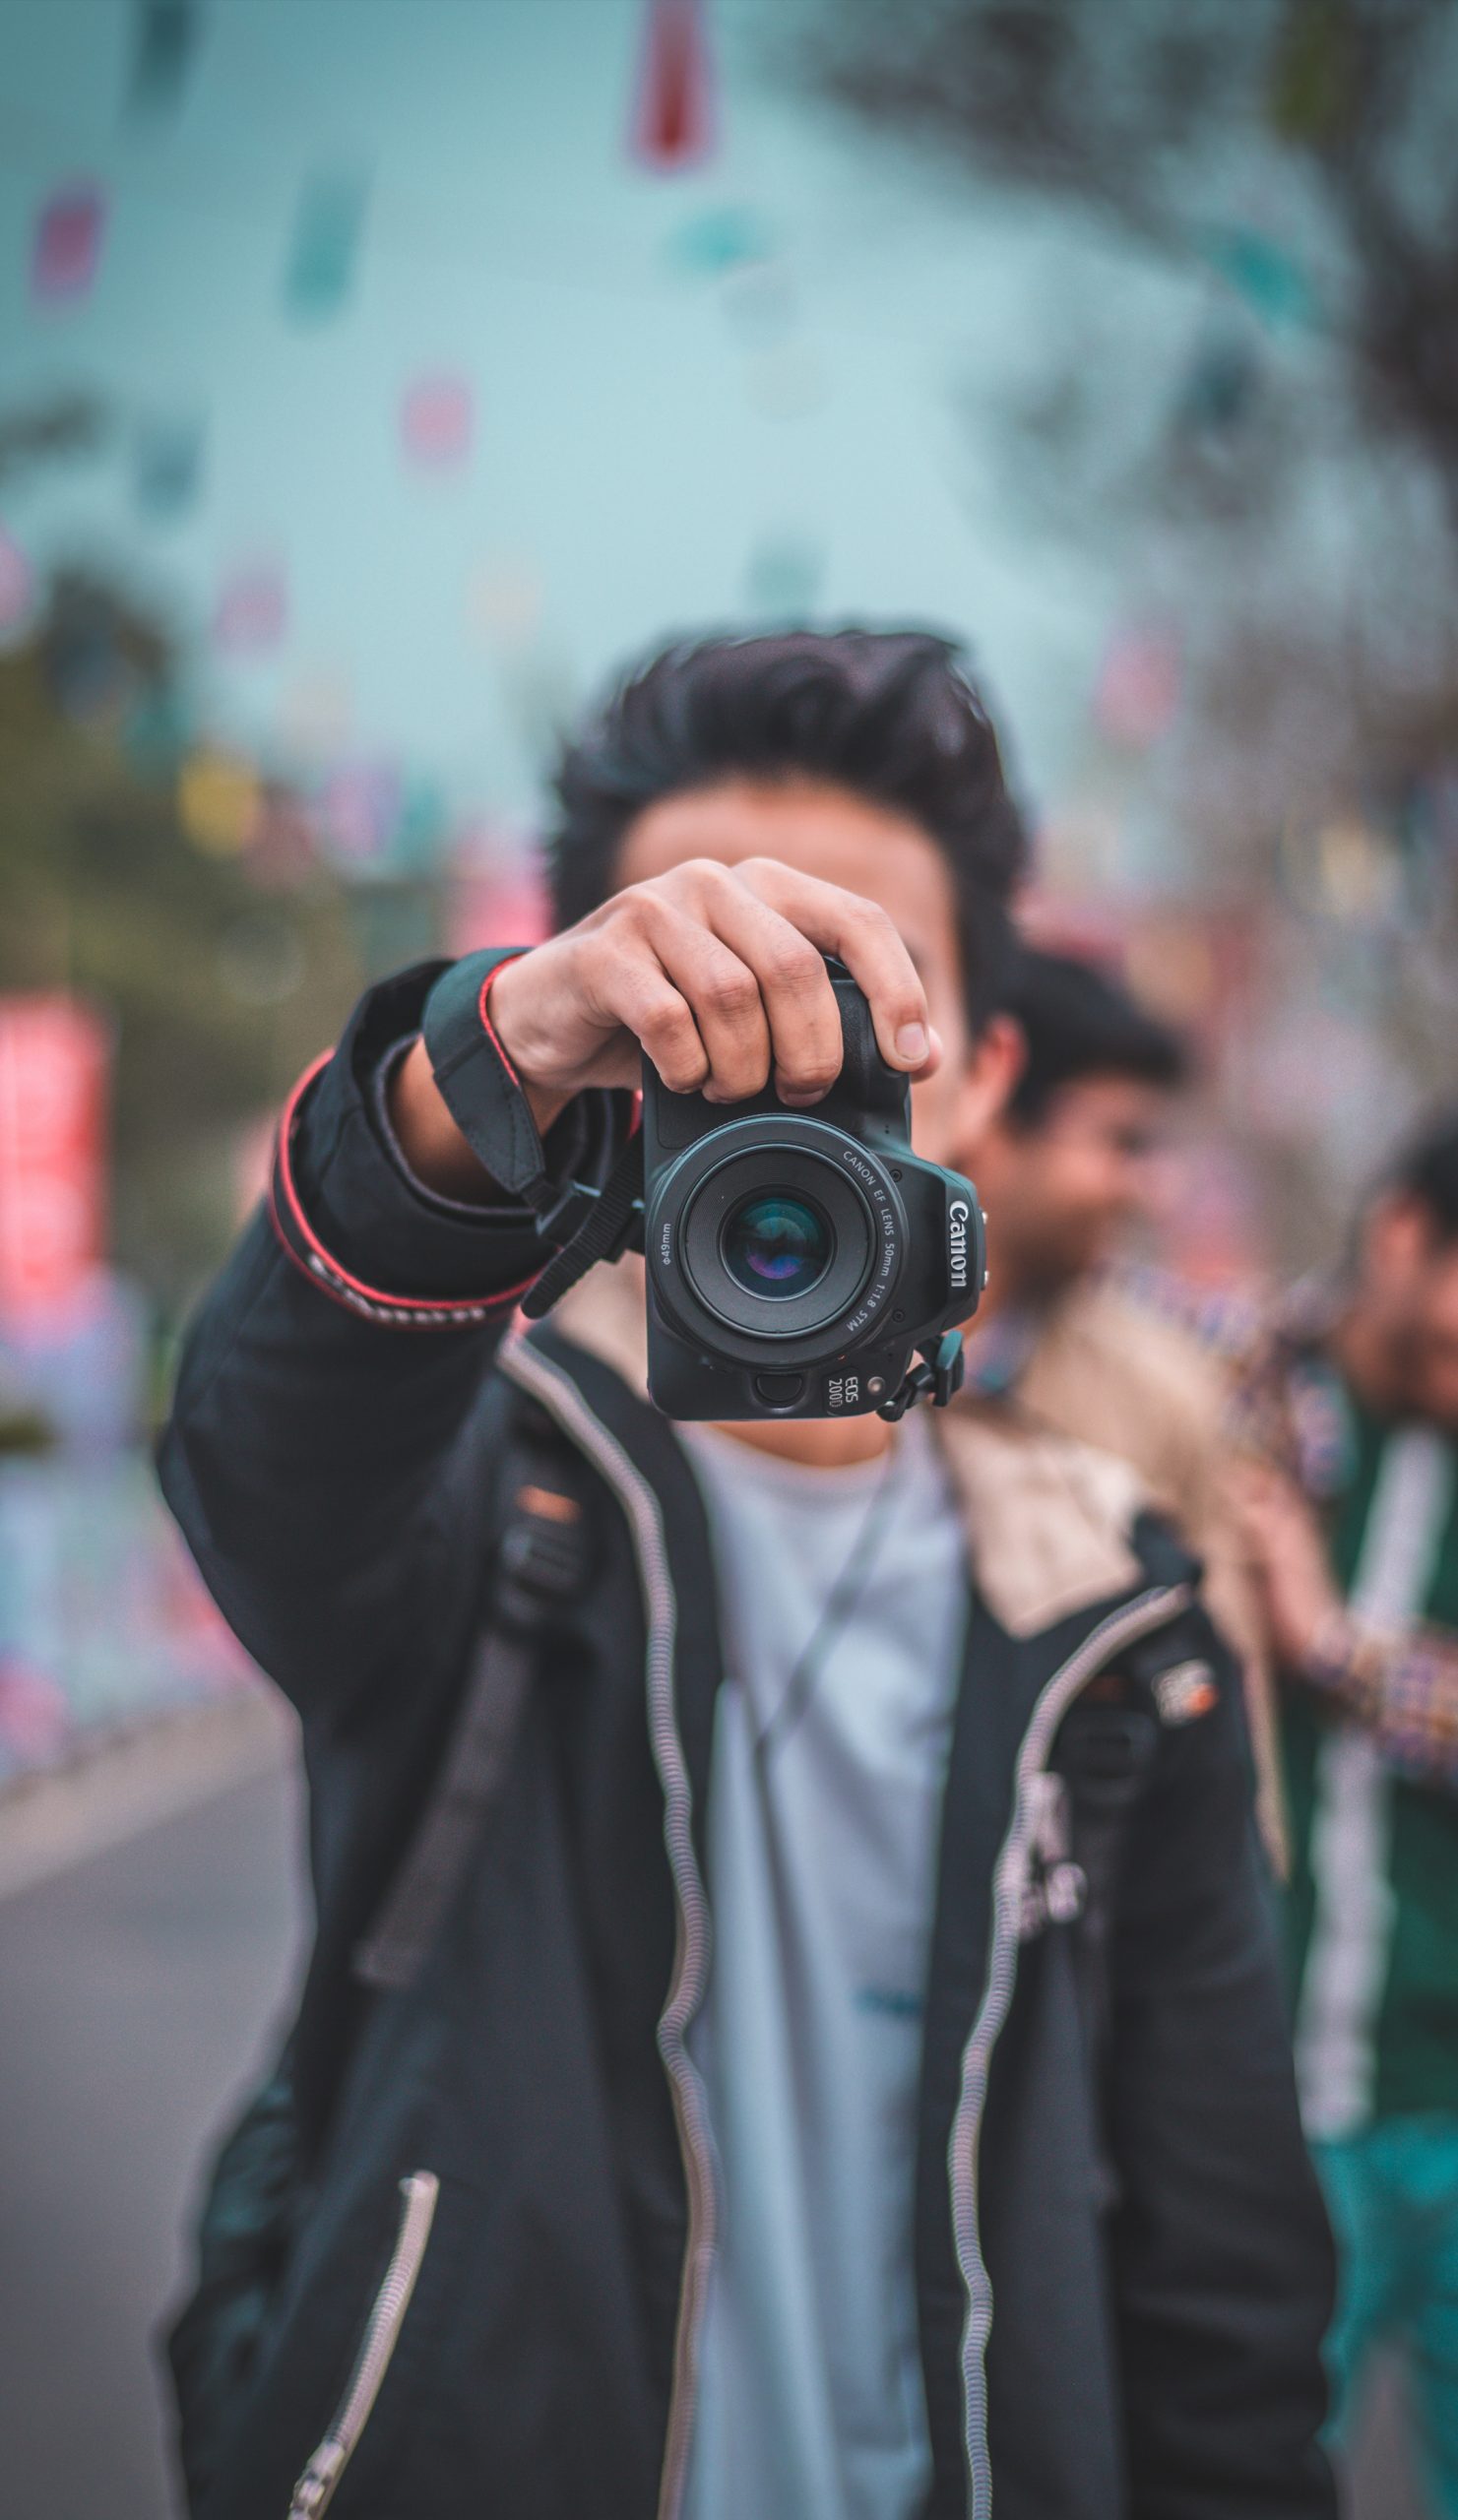 How To Become A Photography Entrepreneur?